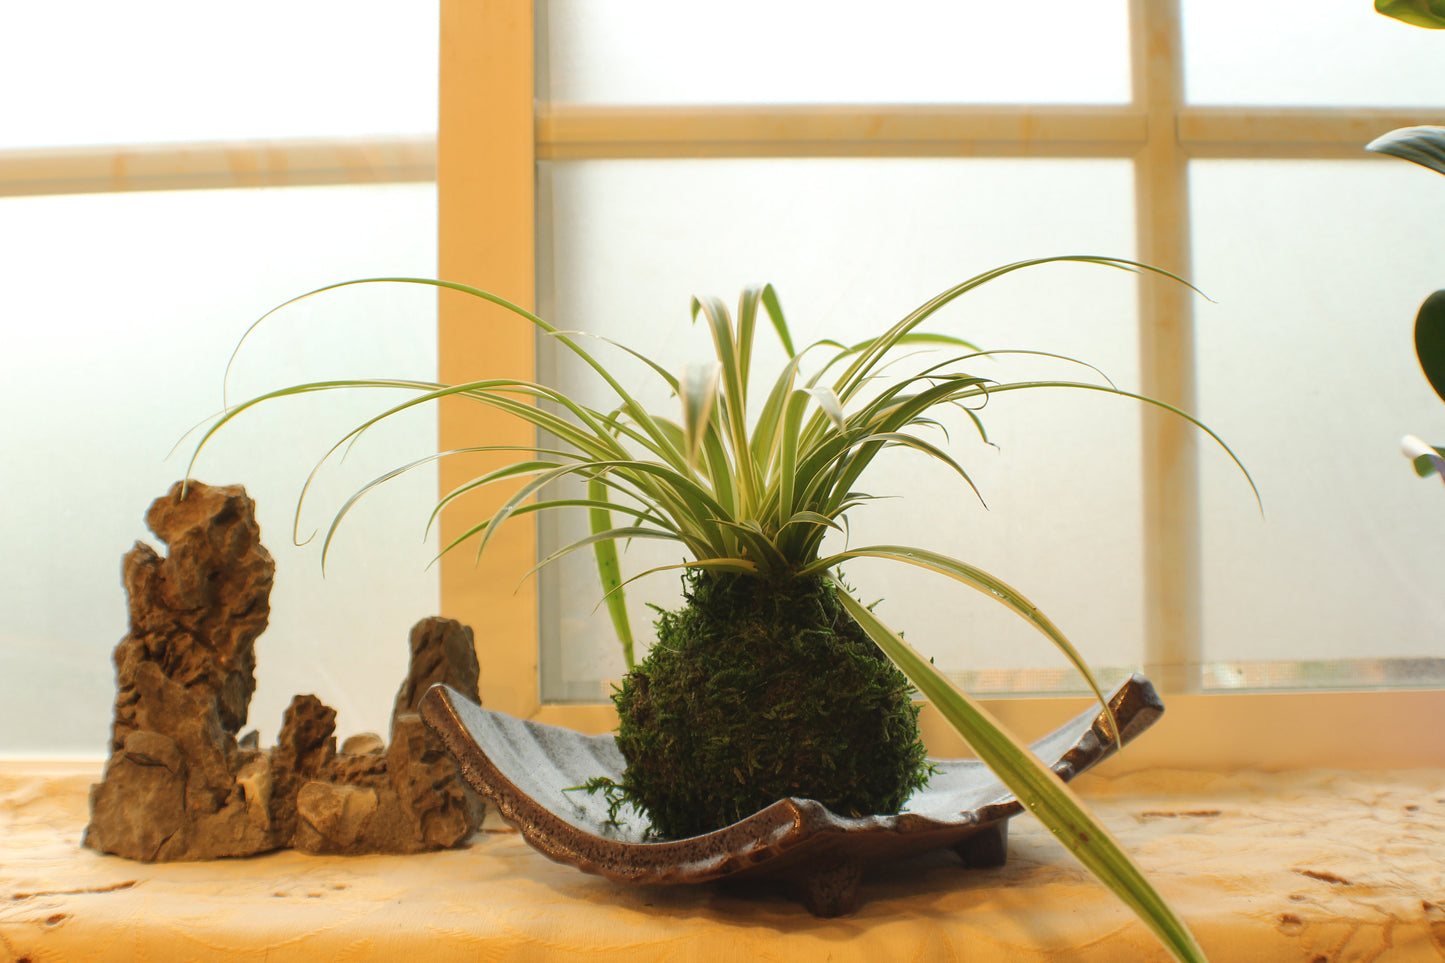 Spider plant (Chlorophytum comosum) Kokedama - Moss ball, One of NASA’s ‘Top Clean Air Plants!